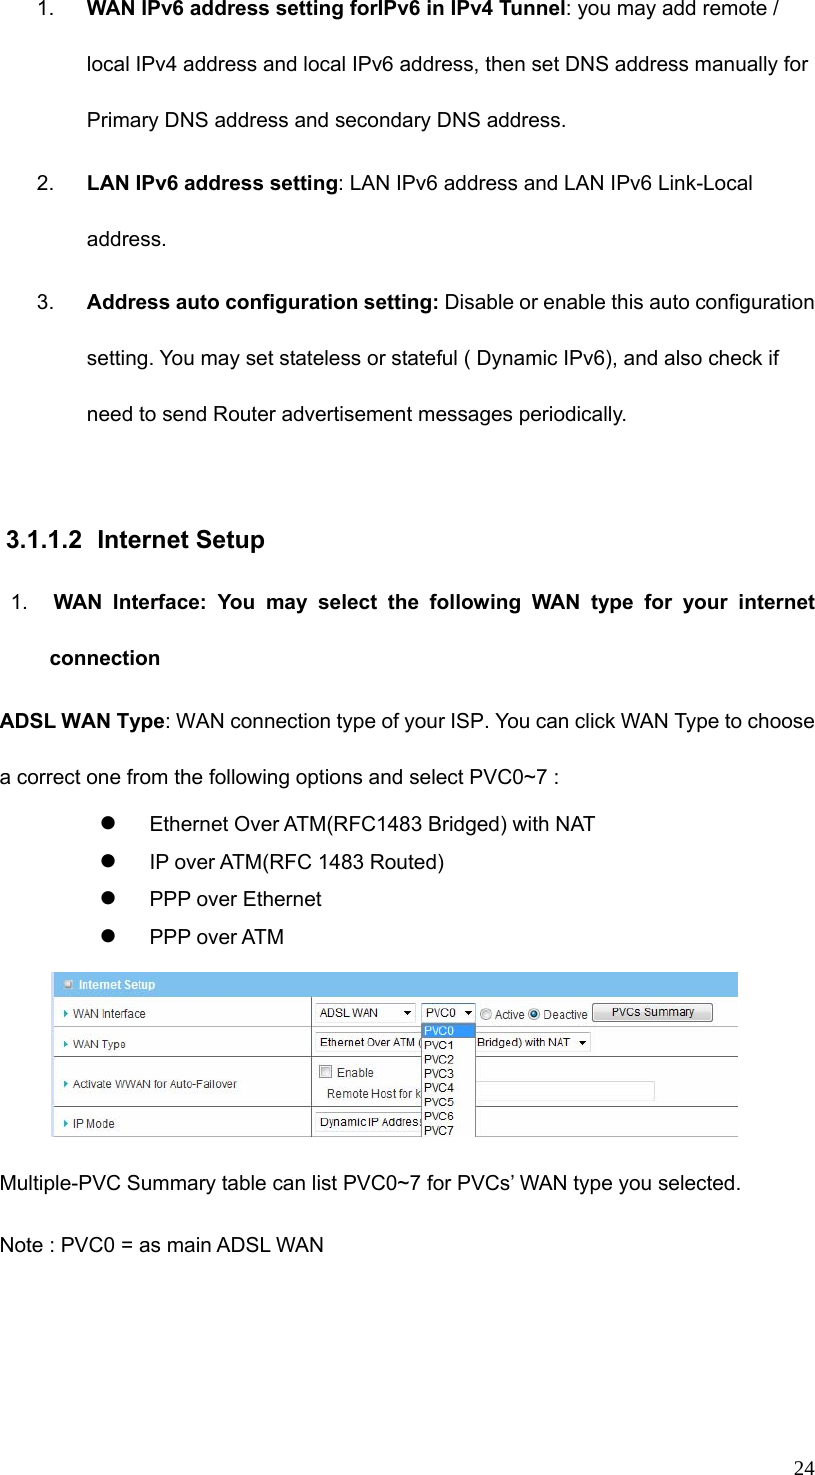  241.  WAN IPv6 address setting forIPv6 in IPv4 Tunnel: you may add remote / local IPv4 address and local IPv6 address, then set DNS address manually for Primary DNS address and secondary DNS address. 2.  LAN IPv6 address setting: LAN IPv6 address and LAN IPv6 Link-Local address. 3.  Address auto configuration setting: Disable or enable this auto configuration setting. You may set stateless or stateful ( Dynamic IPv6), and also check if need to send Router advertisement messages periodically.  3.1.1.2 Internet Setup 1.  WAN Interface: You may select the following WAN type for your internet connection ADSL WAN Type: WAN connection type of your ISP. You can click WAN Type to choose a correct one from the following options and select PVC0~7 :     z Ethernet Over ATM(RFC1483 Bridged) with NAT z IP over ATM(RFC 1483 Routed) z PPP over Ethernet z PPP over ATM  Multiple-PVC Summary table can list PVC0~7 for PVCs’ WAN type you selected. Note : PVC0 = as main ADSL WAN 